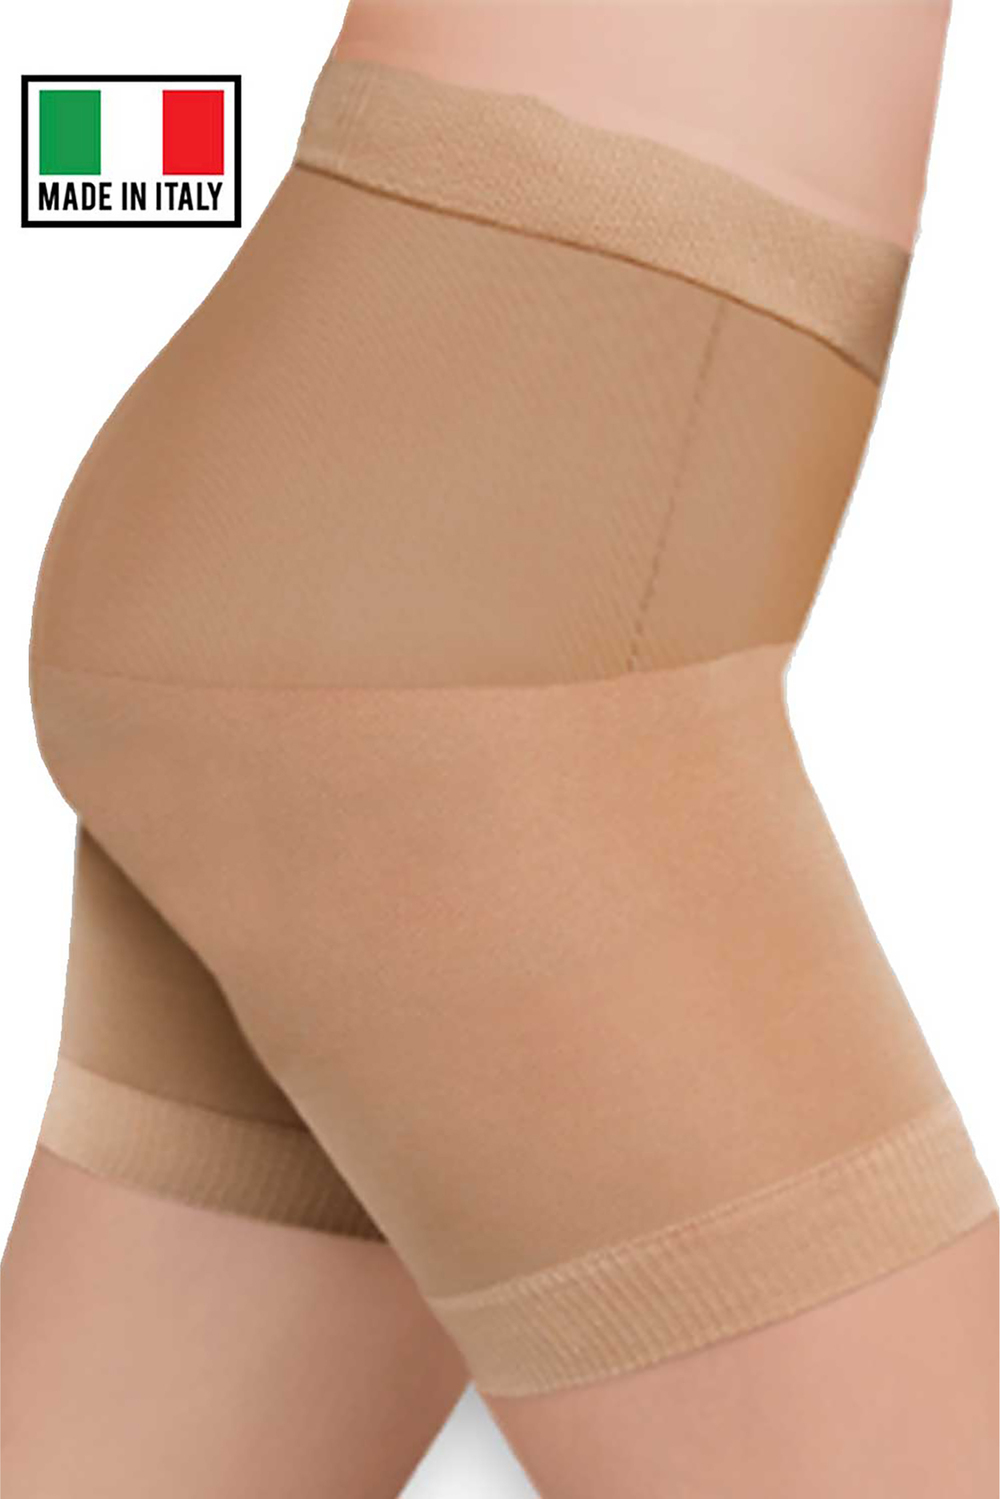 ShapeOn - Tummy slimming short with non-rolling silicone band, small (S), nude